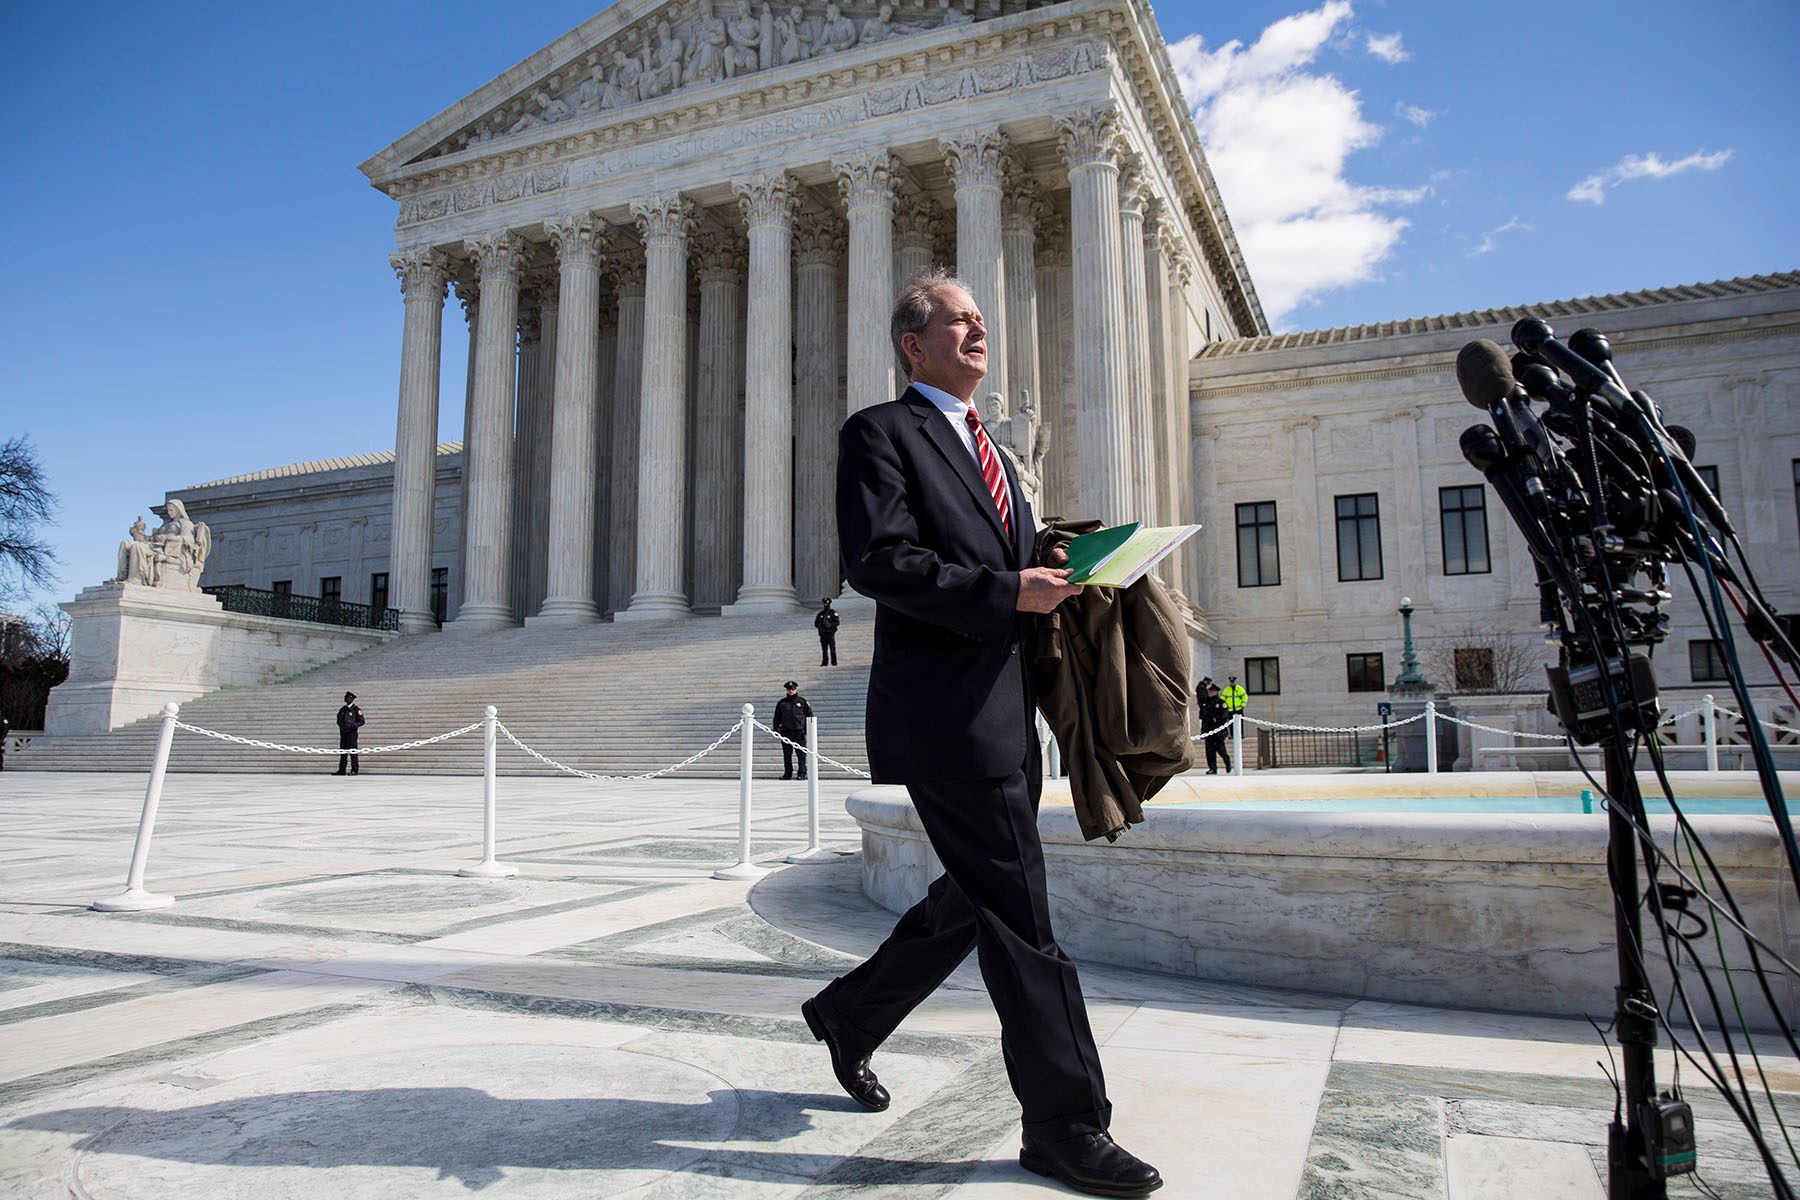 Clarke Forsythe walks towards microphone as he prepares to speak to the media in front of the Supreme Court building.